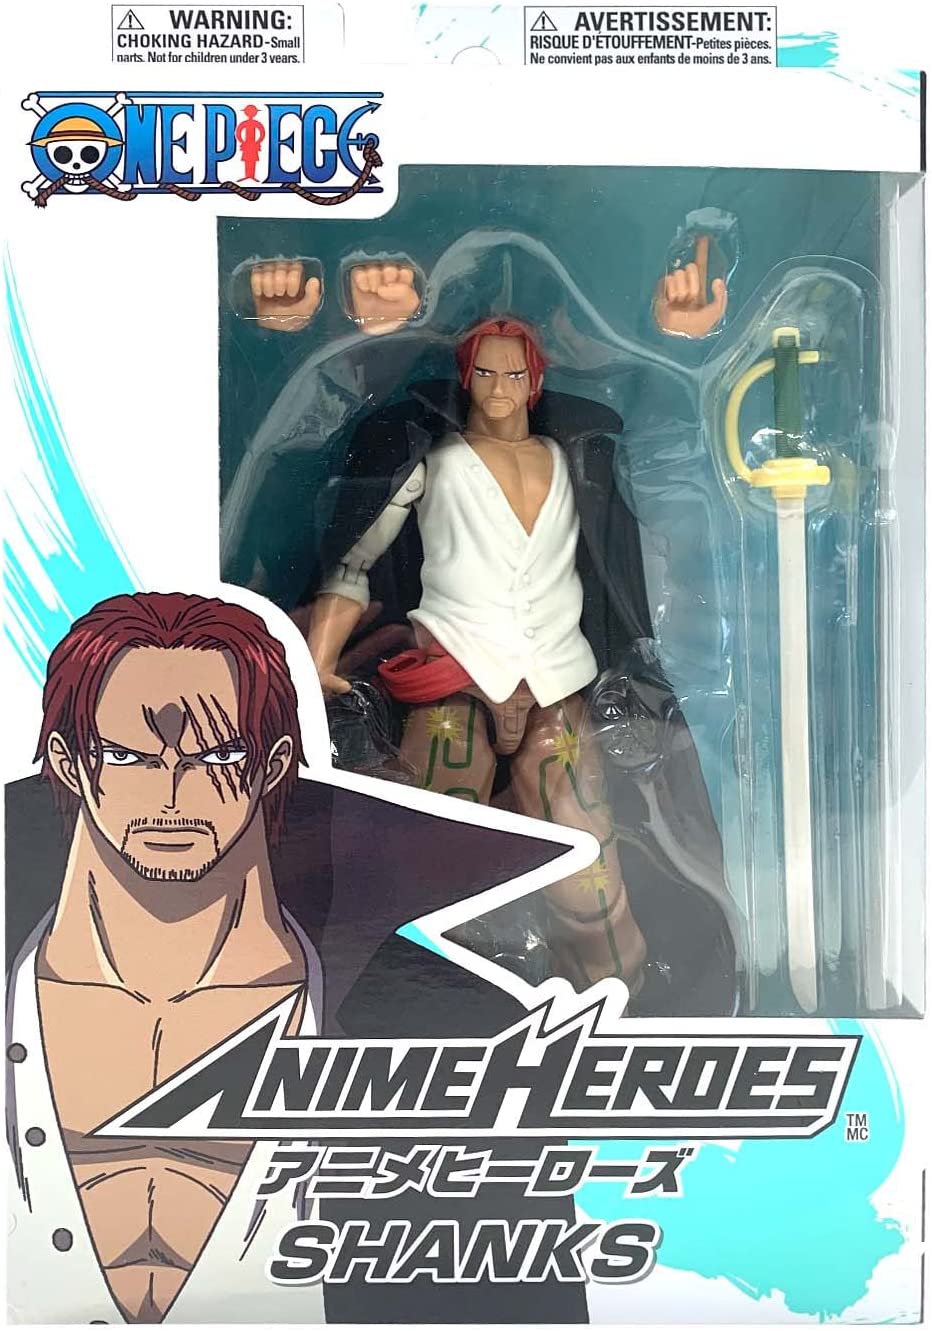 Anime Heroes Shanks 6.5" Action Figure